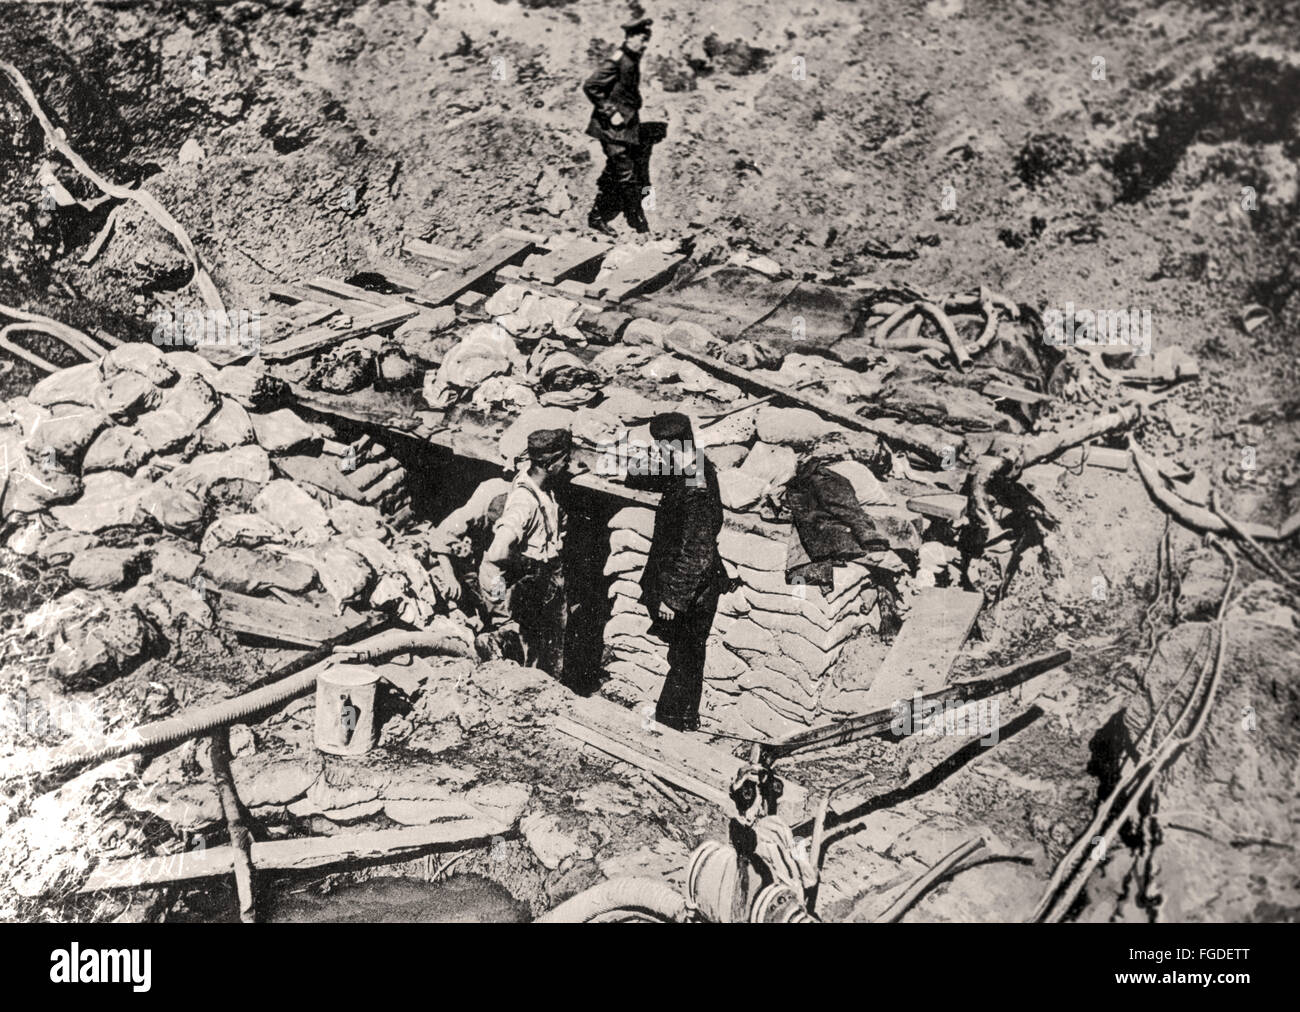 German soldiers in a conquered French mine crater with dugout near Verdun around 1916. The Battle of Verdun was fough from 21 February to 20 December 1916 between the German Empire and France and became a symbol for the tragic fruitlessness of static warfare. Fotoarchiv für Zeitgeschichte Stock Photo